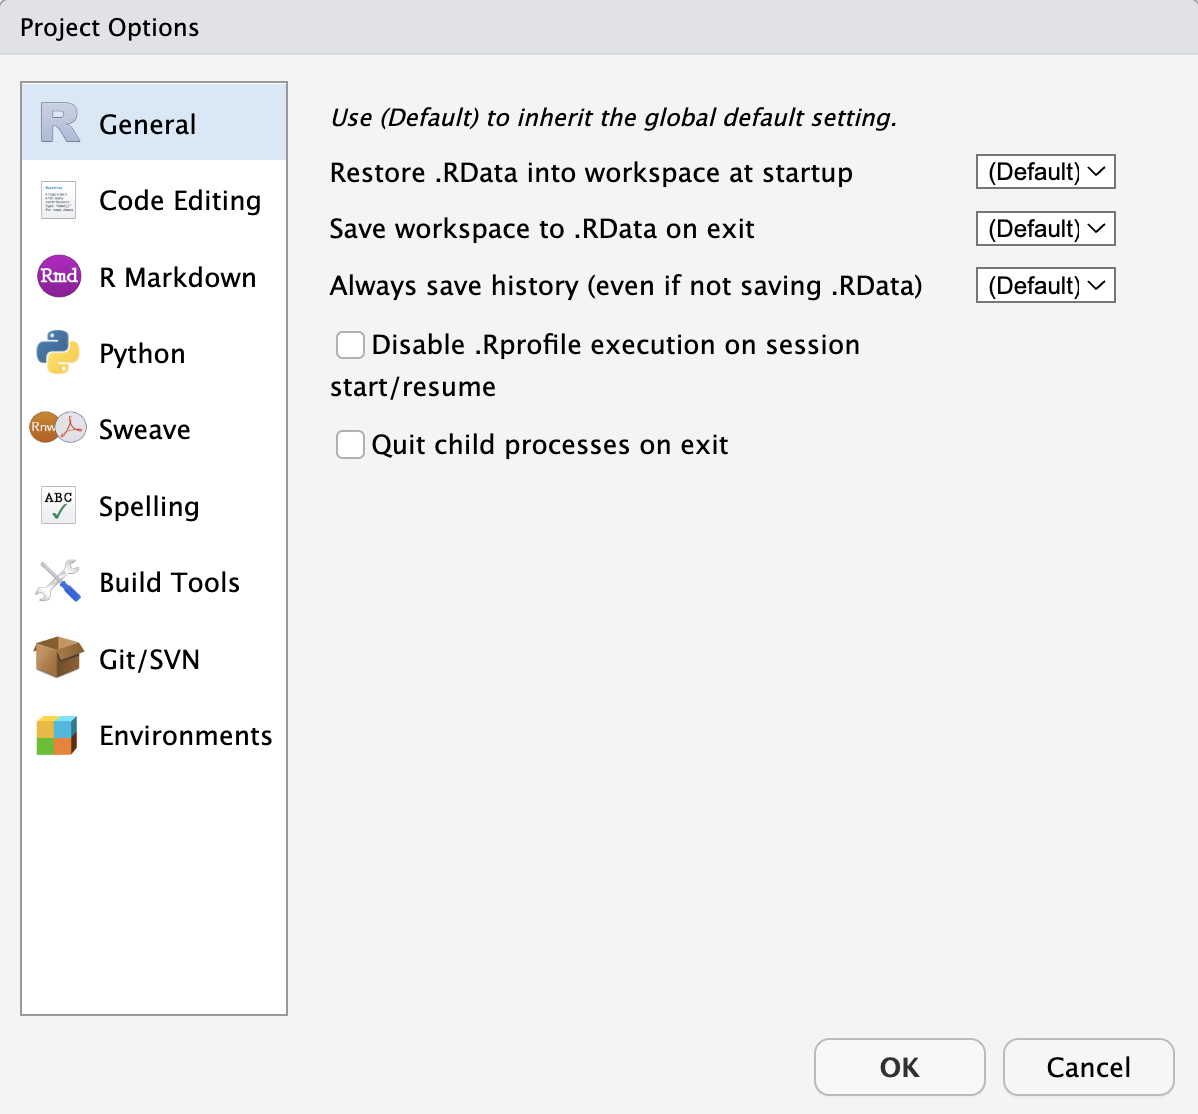 The Project Options preference page in the RStudio IDE. On the left side are nine categories: General, Code Editing, R Markdown, Python, Sweave, Spelling, Build Tools, Git/SVN, and Environments. The General category is selected. In the main part of the window are three options with dropdown boxes: 1. Restore .RData into workspace at startup; 2. Save workspace to .RData on exit; and 3. Always save history (even if not saving .RData). All three of these options are set to "(Default)". There are two options with checkboxes: 1. Disable .Rprofile execution on session start/resume 2. Quit child processes on exit Both of these are unchecked. At the top of the window is the statement: "Use (Default) to inherit the global default setting".